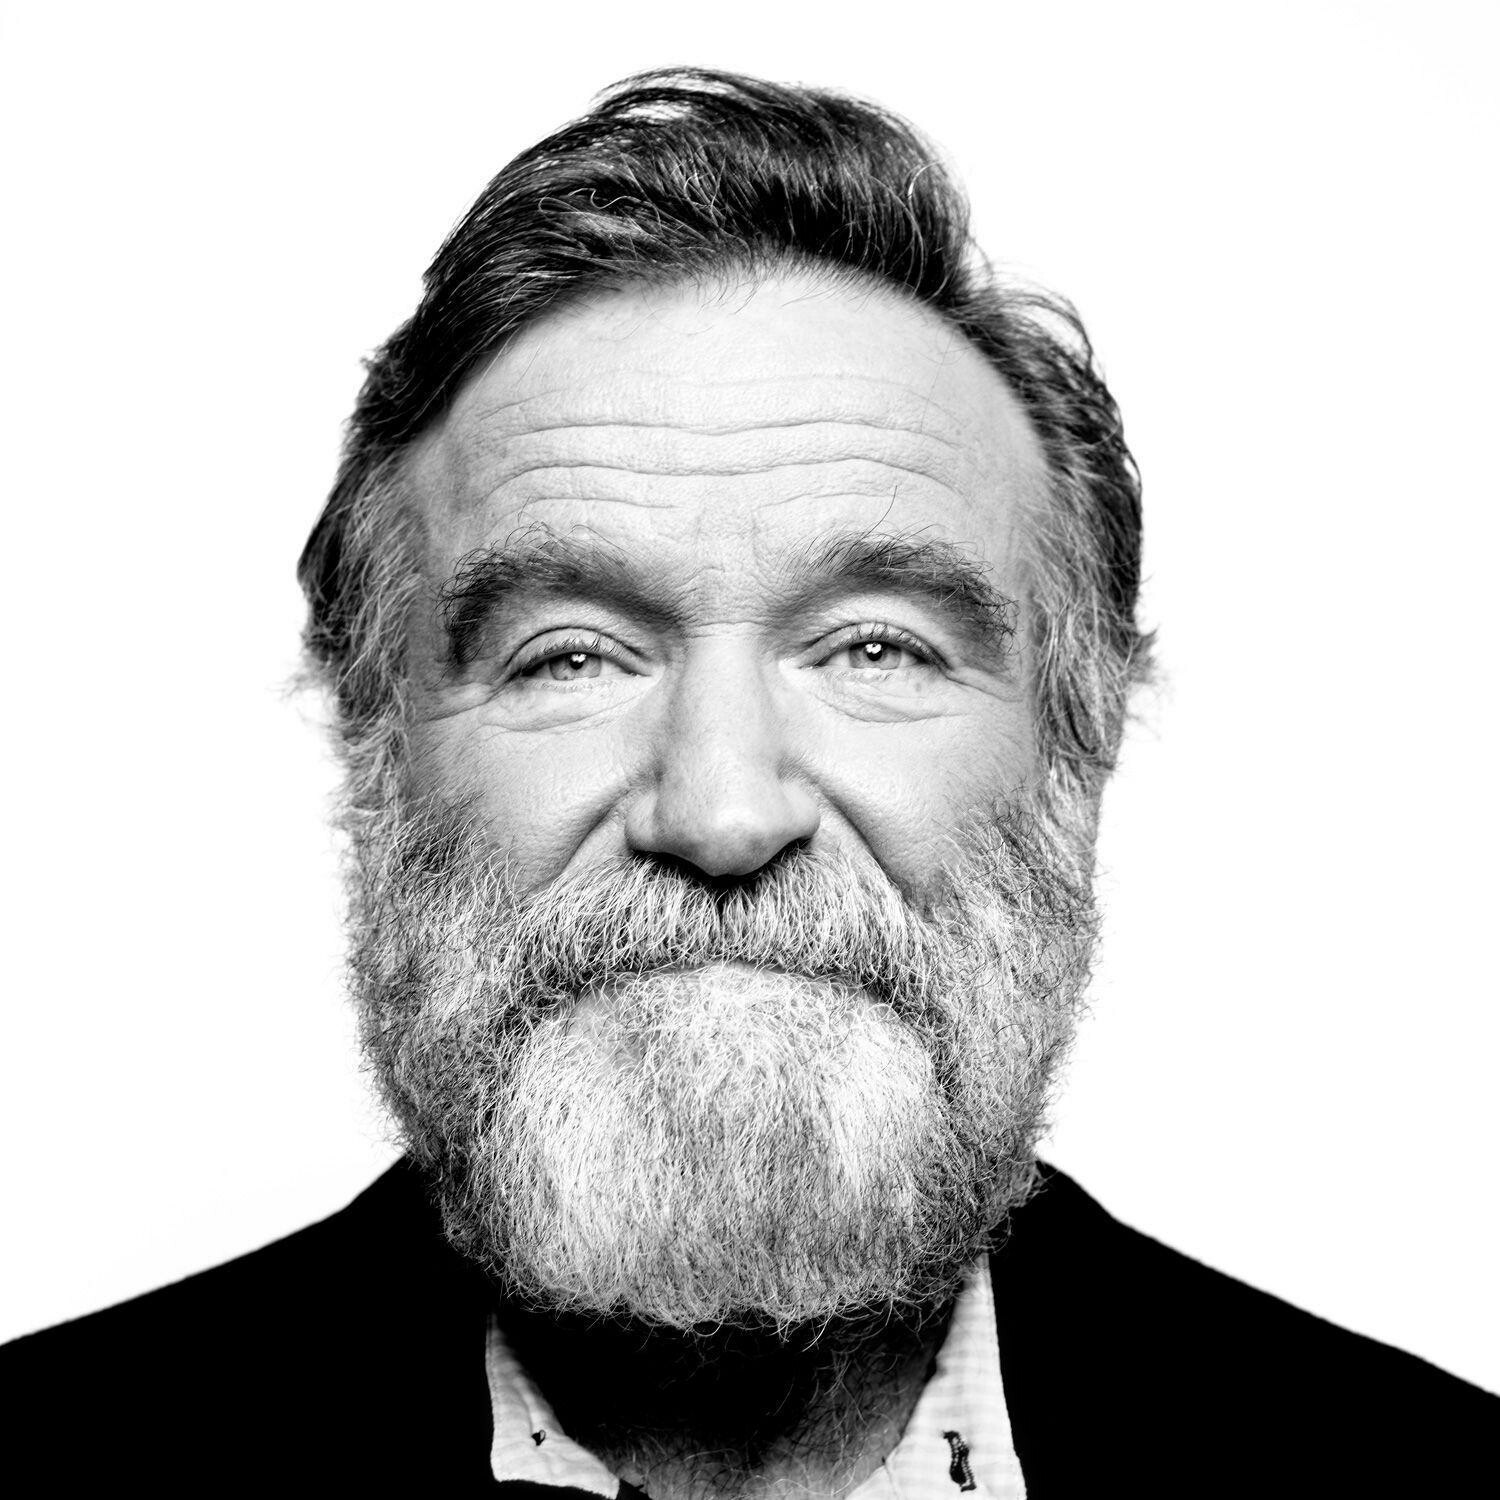 5+ Robin Williams iPhone Wallpapers: HD, 4K, 5K for PC and Mobile |  Download free images for iPhone, Android